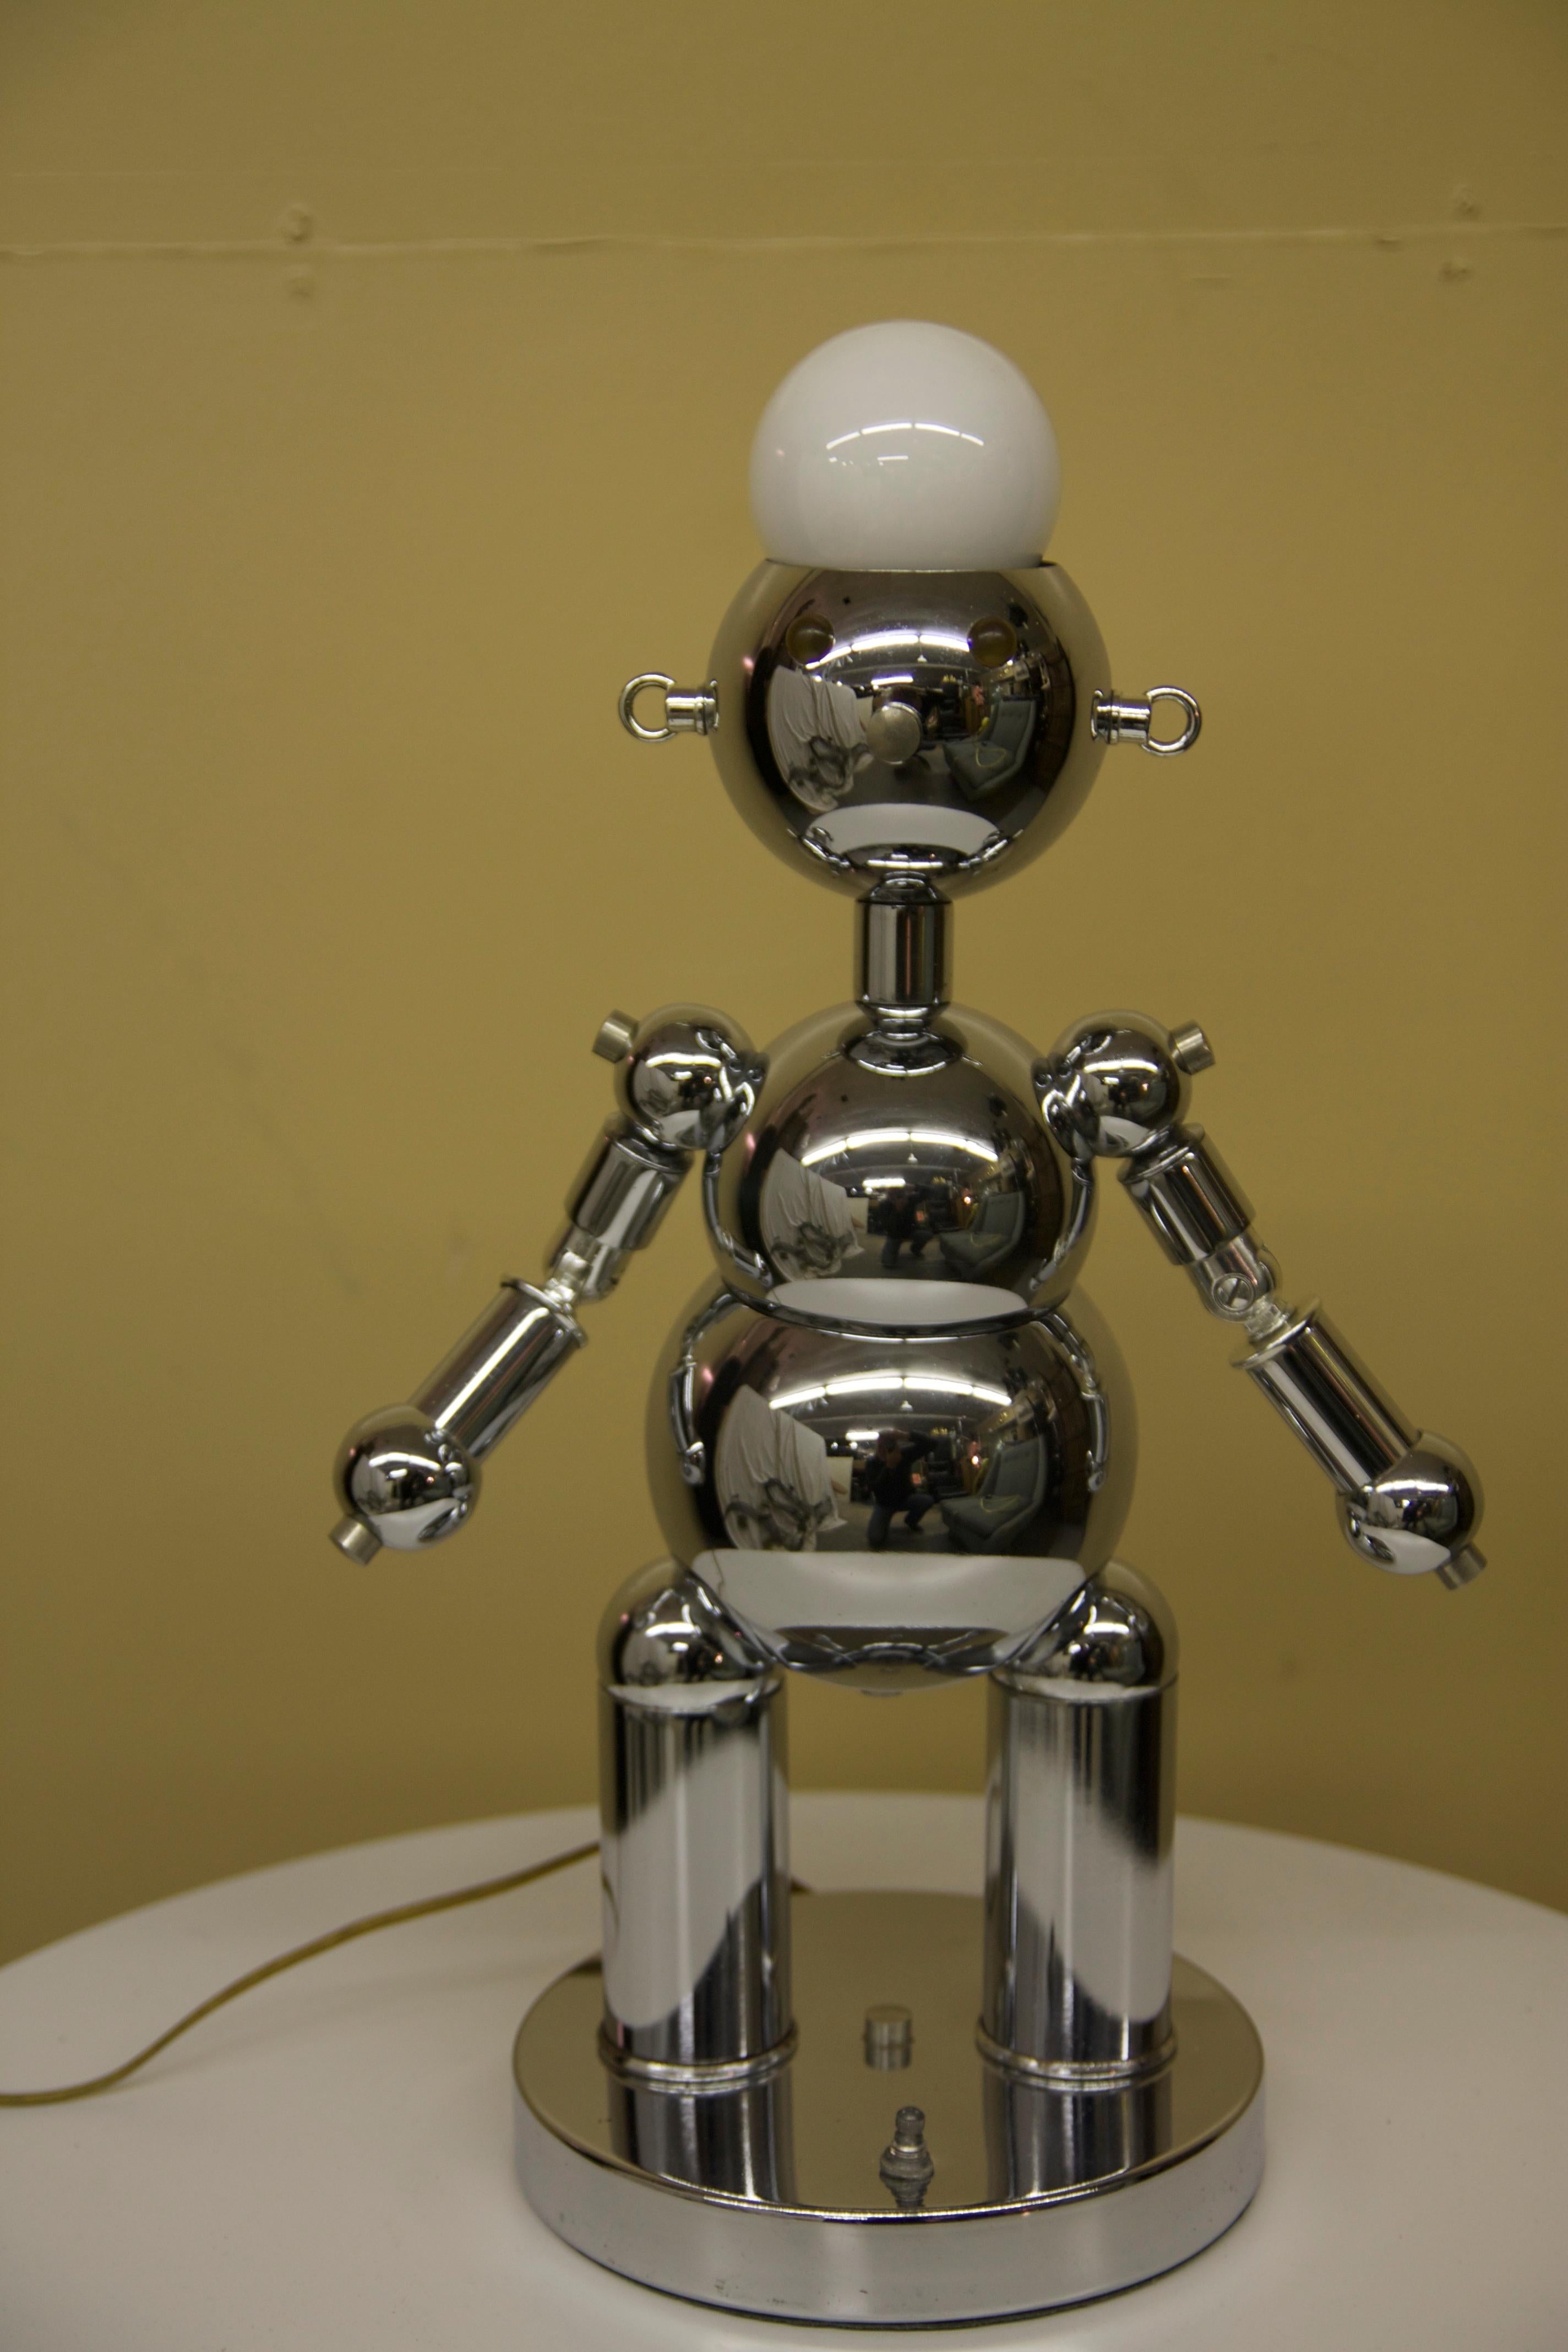 Rarely seen 1970s Torino Robot lamp. Light comes from bulb on top as well as eyes. This lamp is the 17 inch version offered by the Torino Lamp Company.